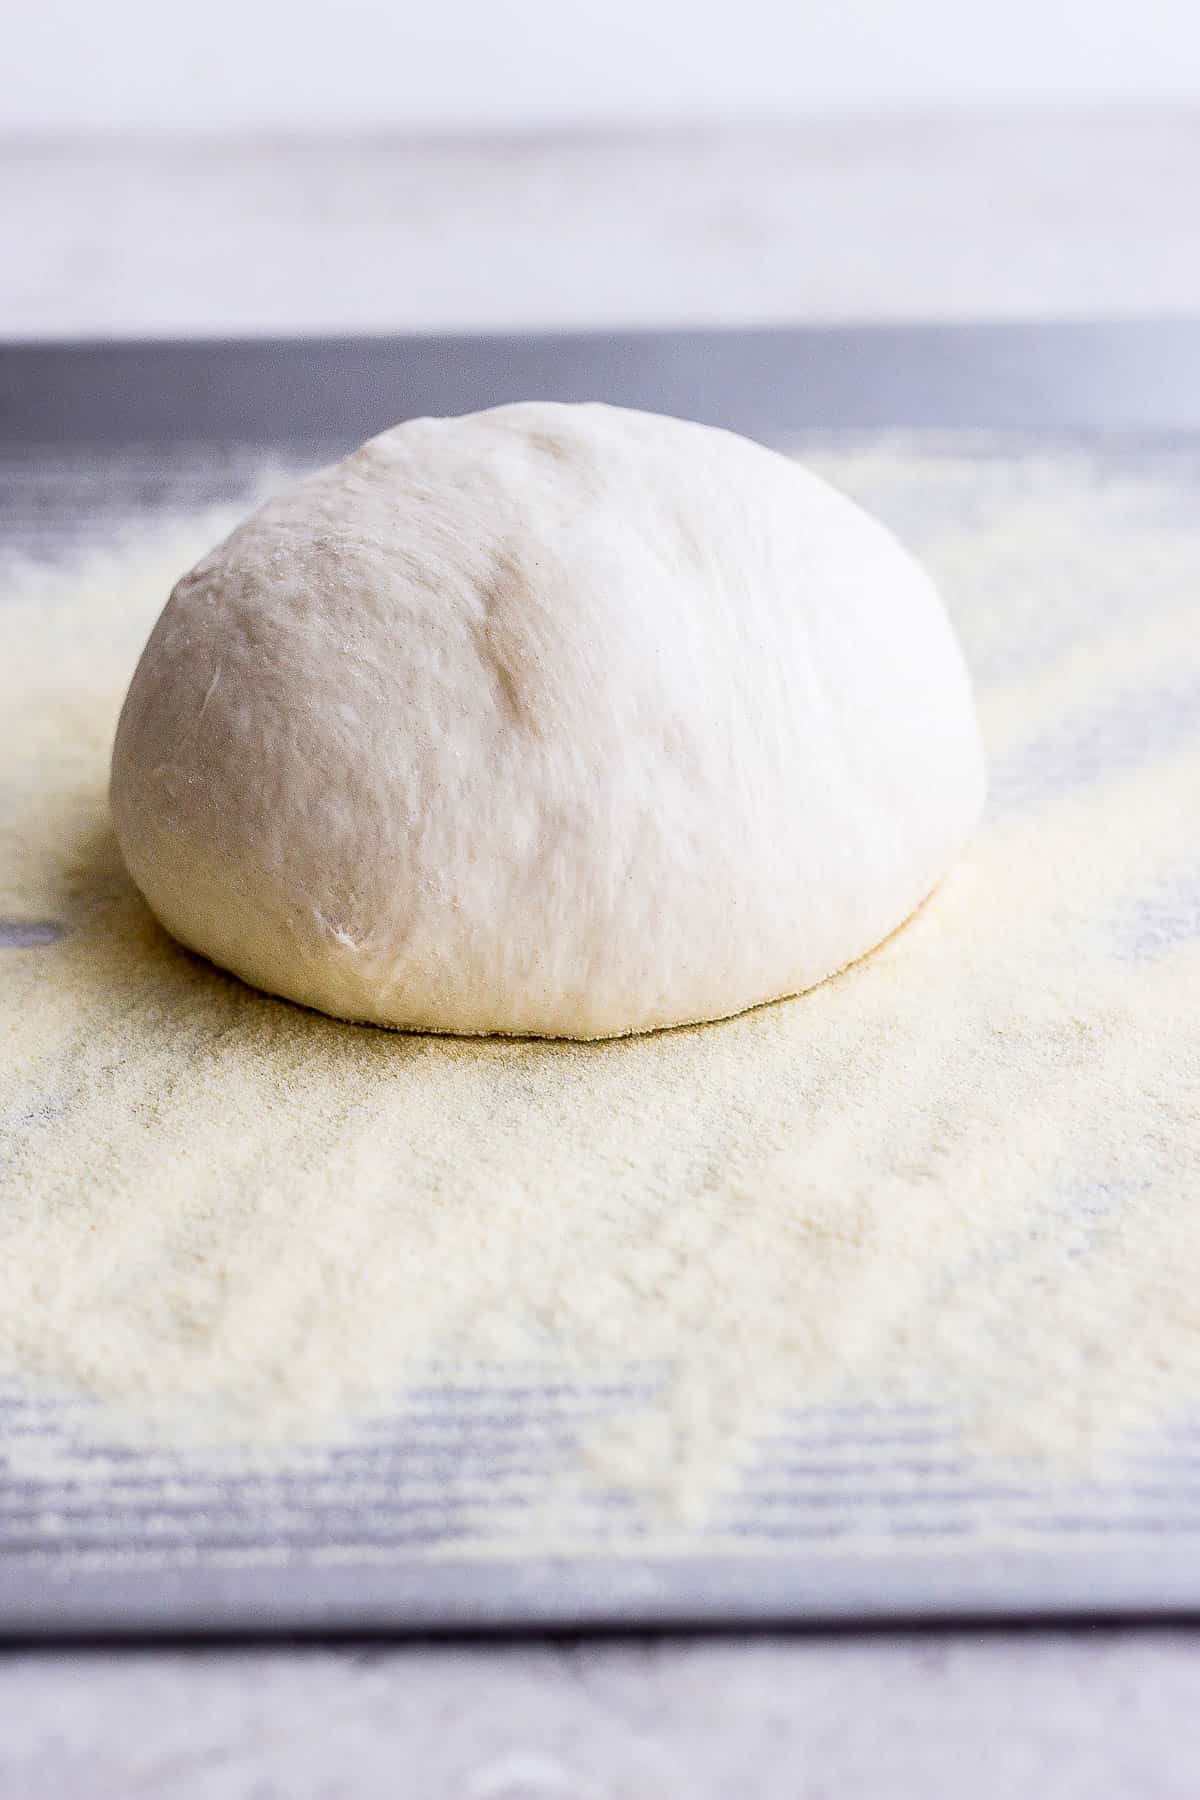 Pizza dough on semolina flour, ready to be rolled out.